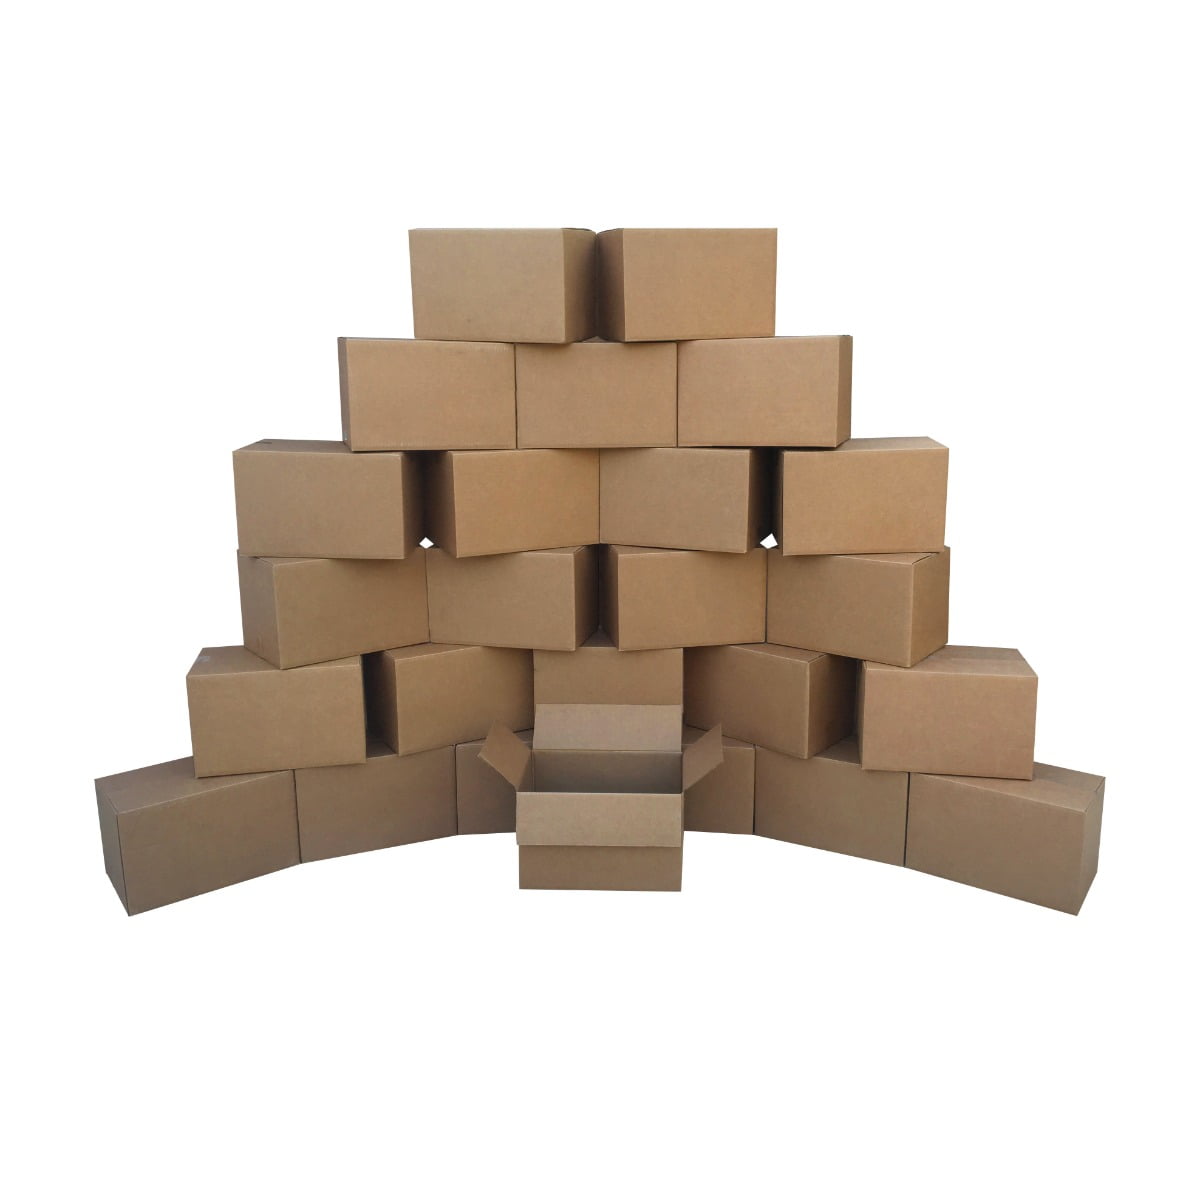 Corrugated Boxes 12 x 12 x 20" ECT-32 Brown Shipping/Moving Boxes 25/Bundle 